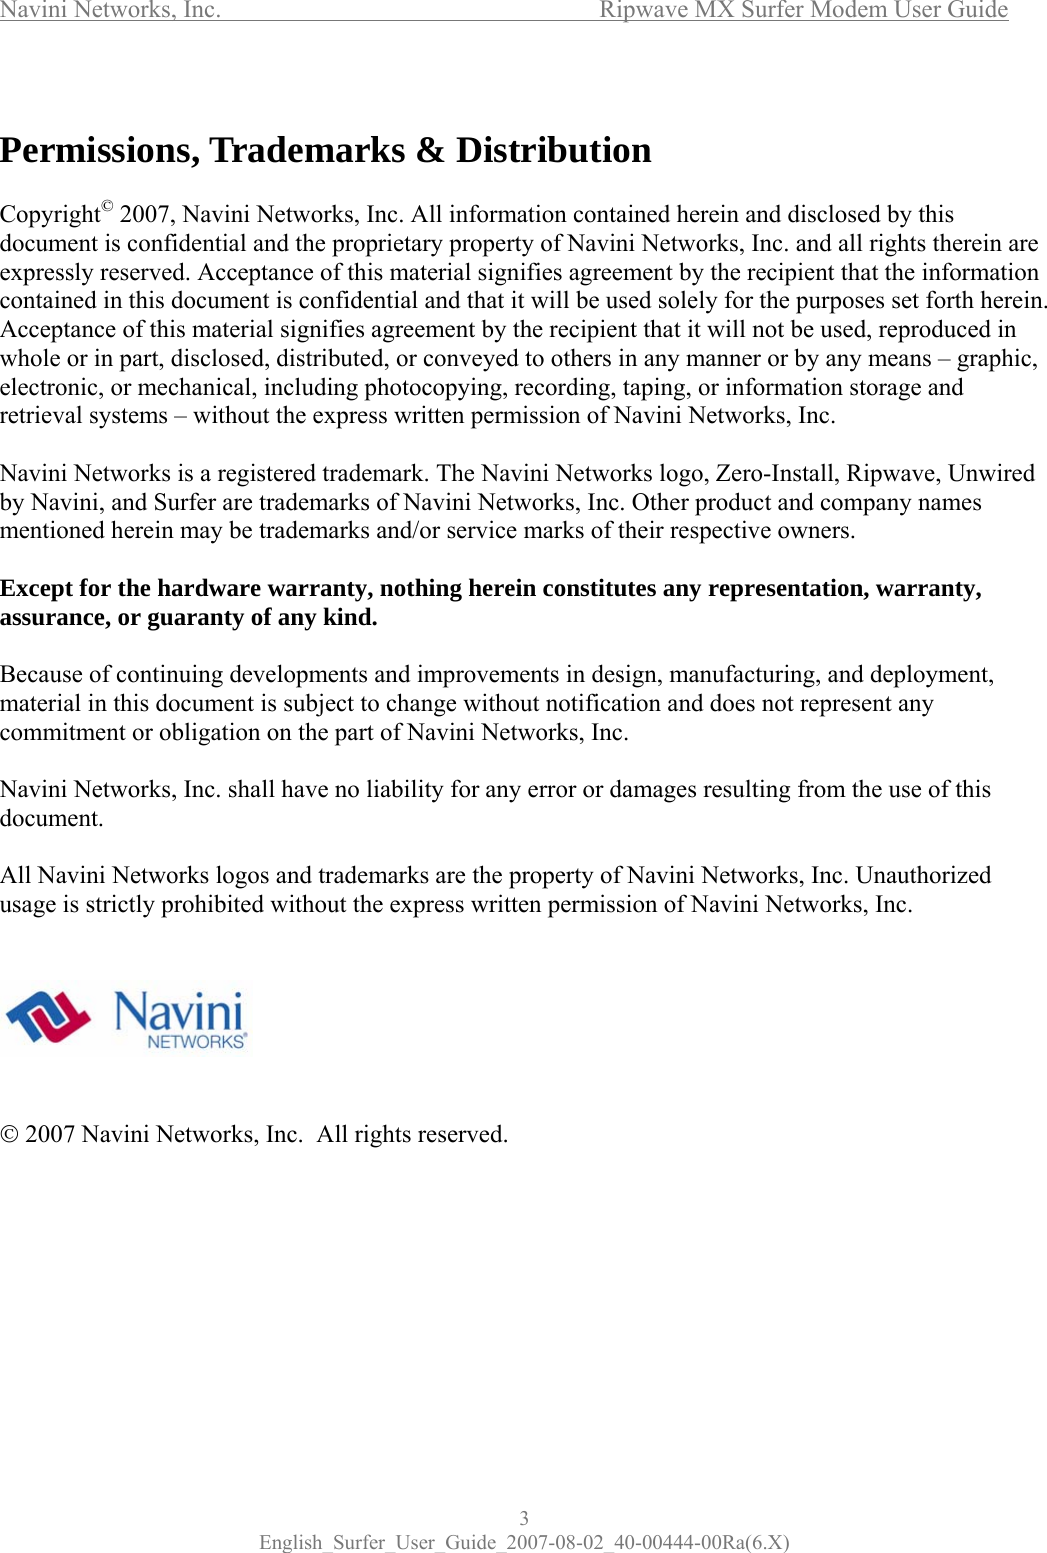 Navini Networks, Inc.      Ripwave MX Surfer Modem User Guide 3 English_Surfer_User_Guide_2007-08-02_40-00444-00Ra(6.X)  Permissions, Trademarks &amp; Distribution  Copyright© 2007, Navini Networks, Inc. All information contained herein and disclosed by this document is confidential and the proprietary property of Navini Networks, Inc. and all rights therein are expressly reserved. Acceptance of this material signifies agreement by the recipient that the information contained in this document is confidential and that it will be used solely for the purposes set forth herein. Acceptance of this material signifies agreement by the recipient that it will not be used, reproduced in whole or in part, disclosed, distributed, or conveyed to others in any manner or by any means – graphic, electronic, or mechanical, including photocopying, recording, taping, or information storage and retrieval systems – without the express written permission of Navini Networks, Inc.  Navini Networks is a registered trademark. The Navini Networks logo, Zero-Install, Ripwave, Unwired by Navini, and Surfer are trademarks of Navini Networks, Inc. Other product and company names mentioned herein may be trademarks and/or service marks of their respective owners.  Except for the hardware warranty, nothing herein constitutes any representation, warranty, assurance, or guaranty of any kind.  Because of continuing developments and improvements in design, manufacturing, and deployment, material in this document is subject to change without notification and does not represent any commitment or obligation on the part of Navini Networks, Inc.  Navini Networks, Inc. shall have no liability for any error or damages resulting from the use of this document.  All Navini Networks logos and trademarks are the property of Navini Networks, Inc. Unauthorized usage is strictly prohibited without the express written permission of Navini Networks, Inc.        © 2007 Navini Networks, Inc.  All rights reserved.       